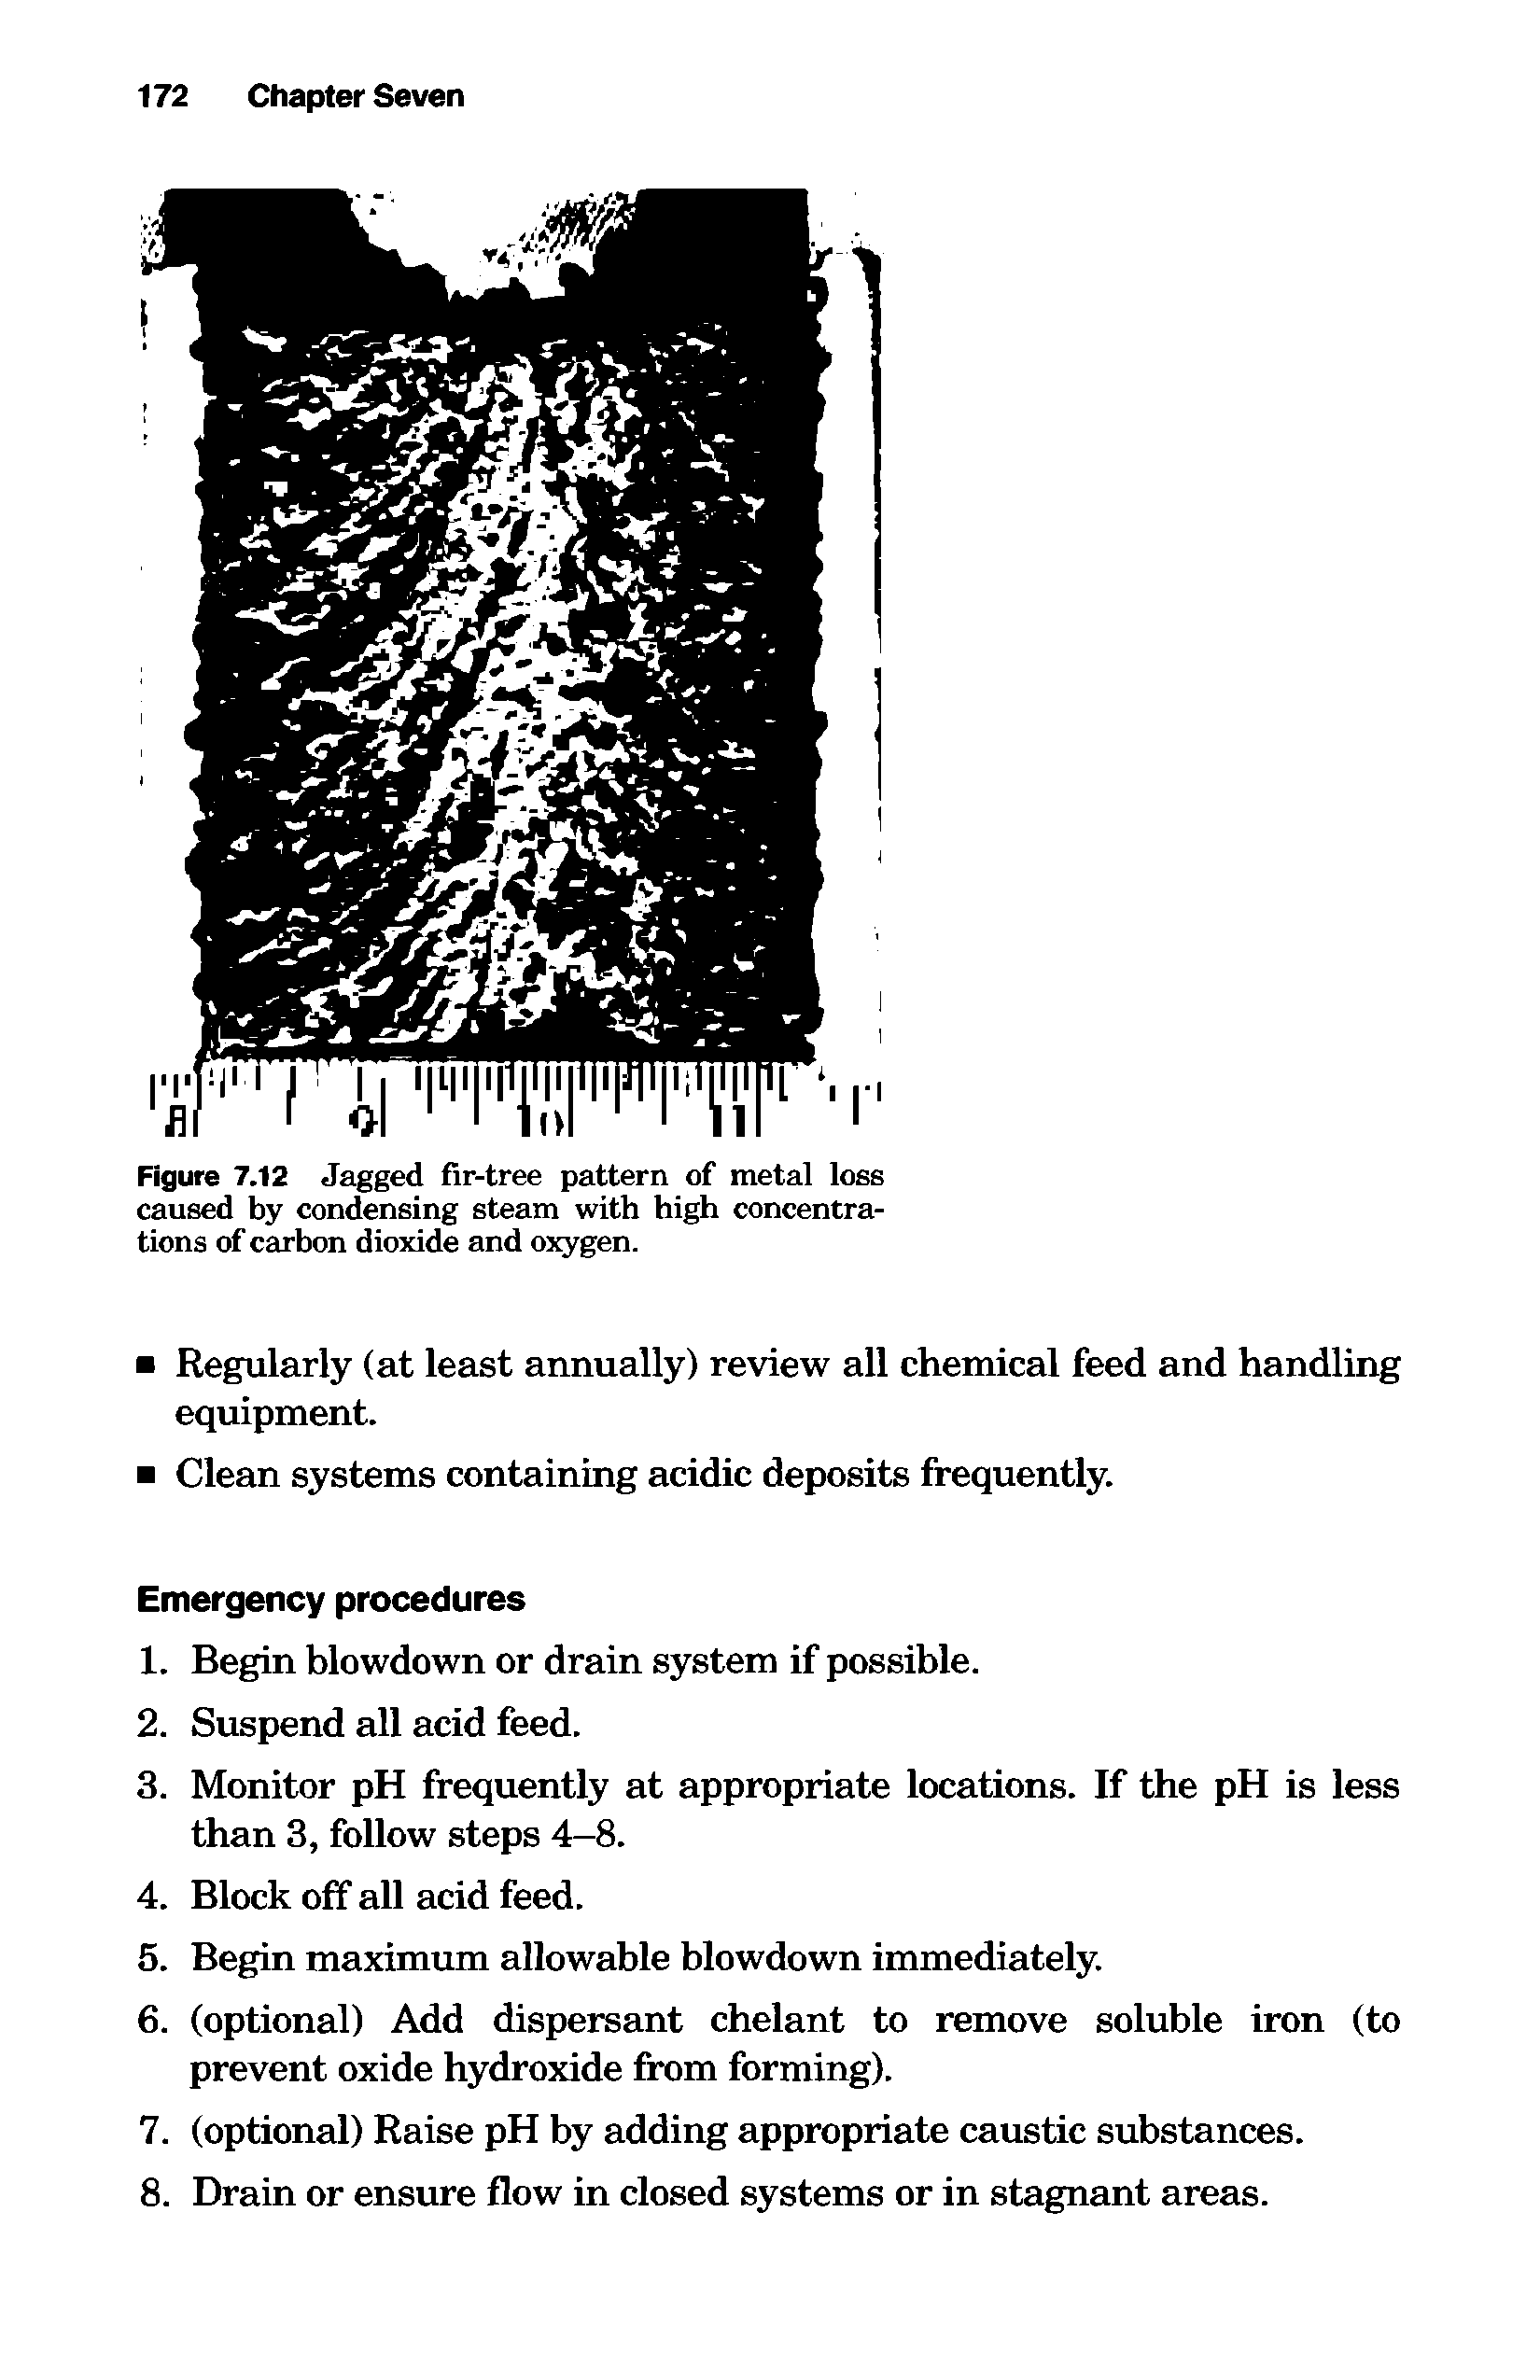 Figure 7.12 Jagged fir-tree pattern of metal loss caused by condensing steam with high concentrations of carbon dioxide and oxygen.